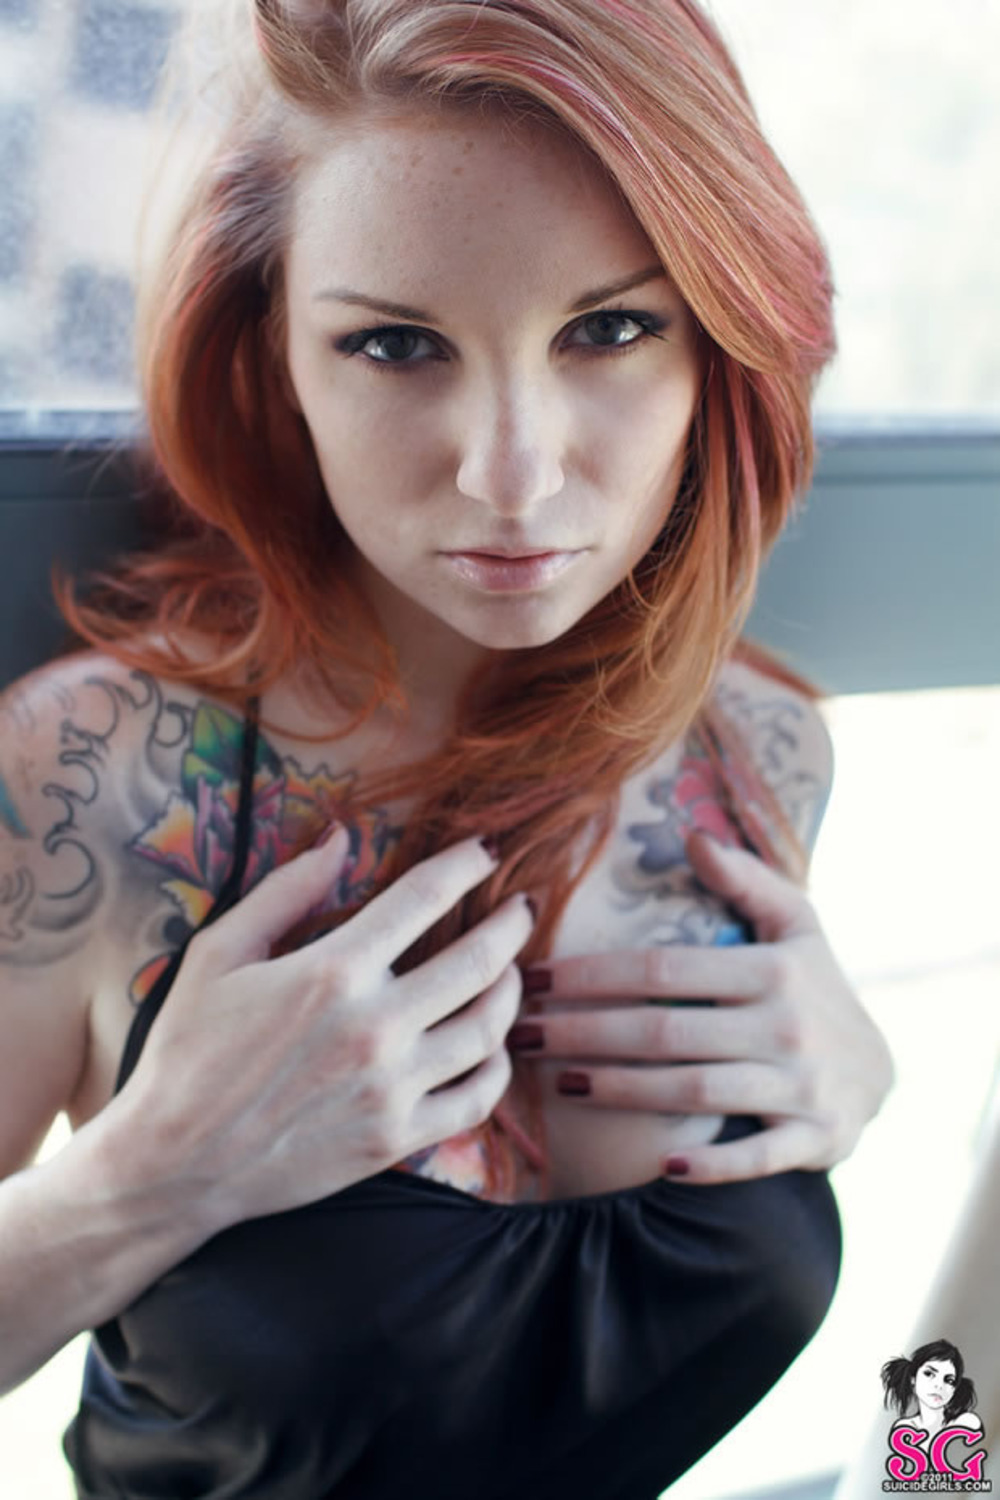 Tattooed Girl Showing Off Her Star Wars Tattooes 04